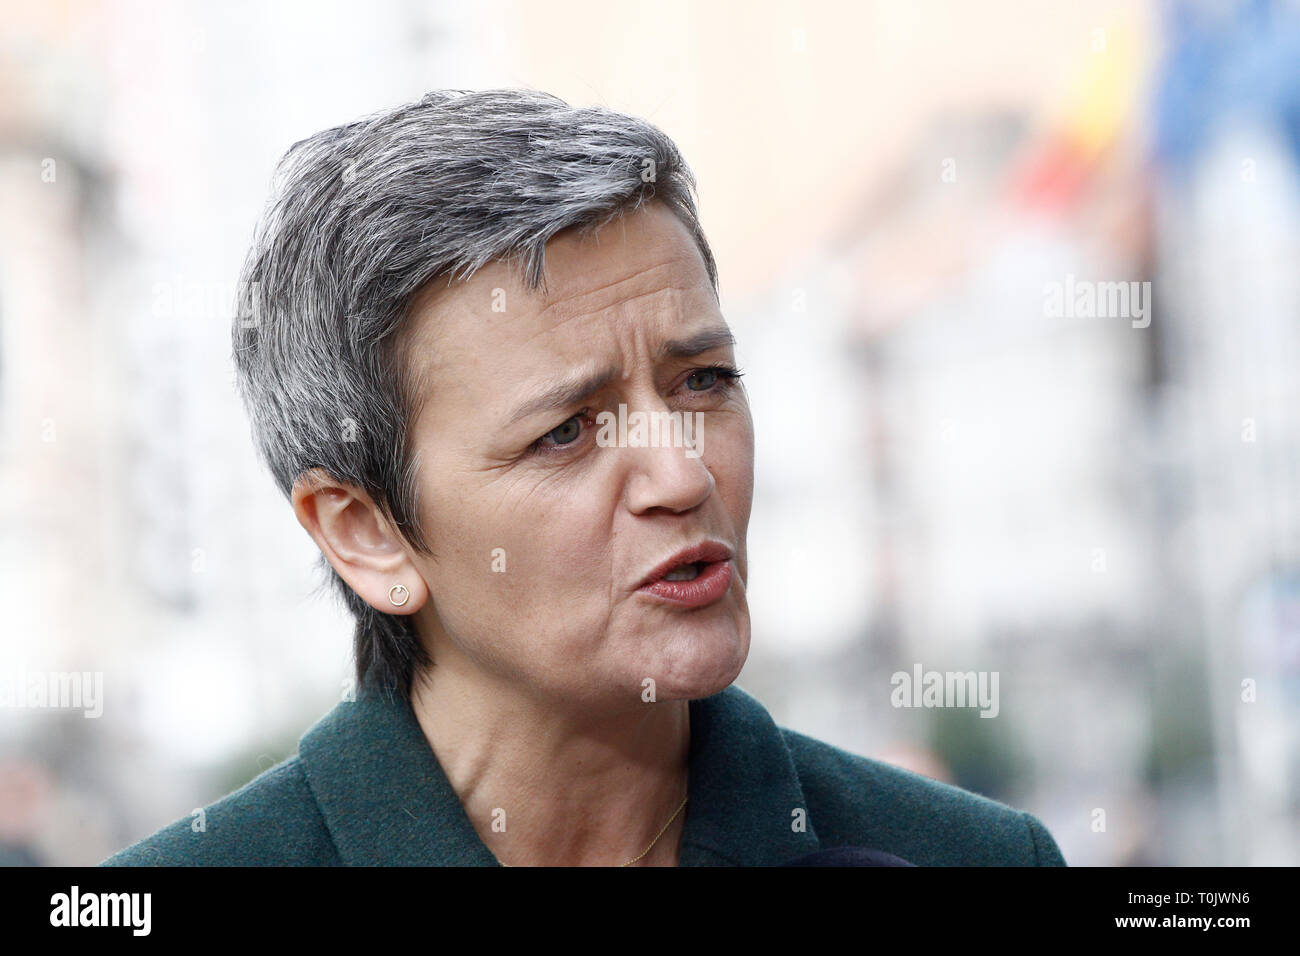 Brussels, Belgium. 20th March 2019.EU Commissioner for Competition Margrethe Vestager speaks to media on the concurrence case with Google online search advertising . Credit: ALEXANDROS MICHAILIDIS/Alamy Live News Stock Photo